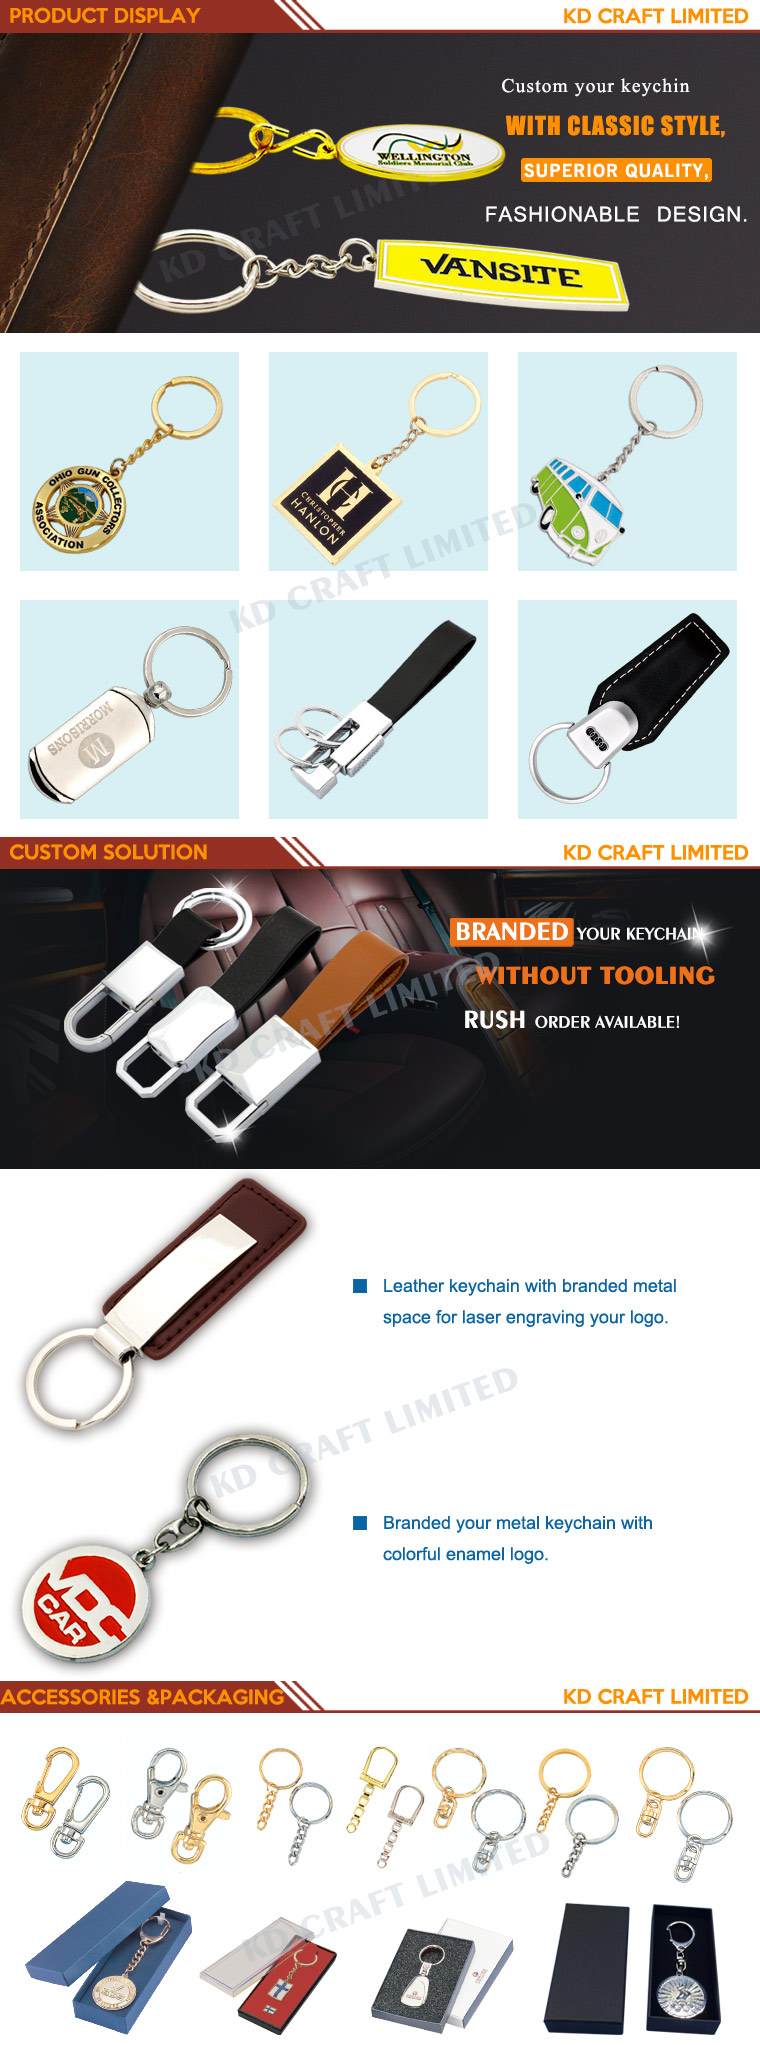 High Quality China Wholesale Leather Key Ring or Chain From China